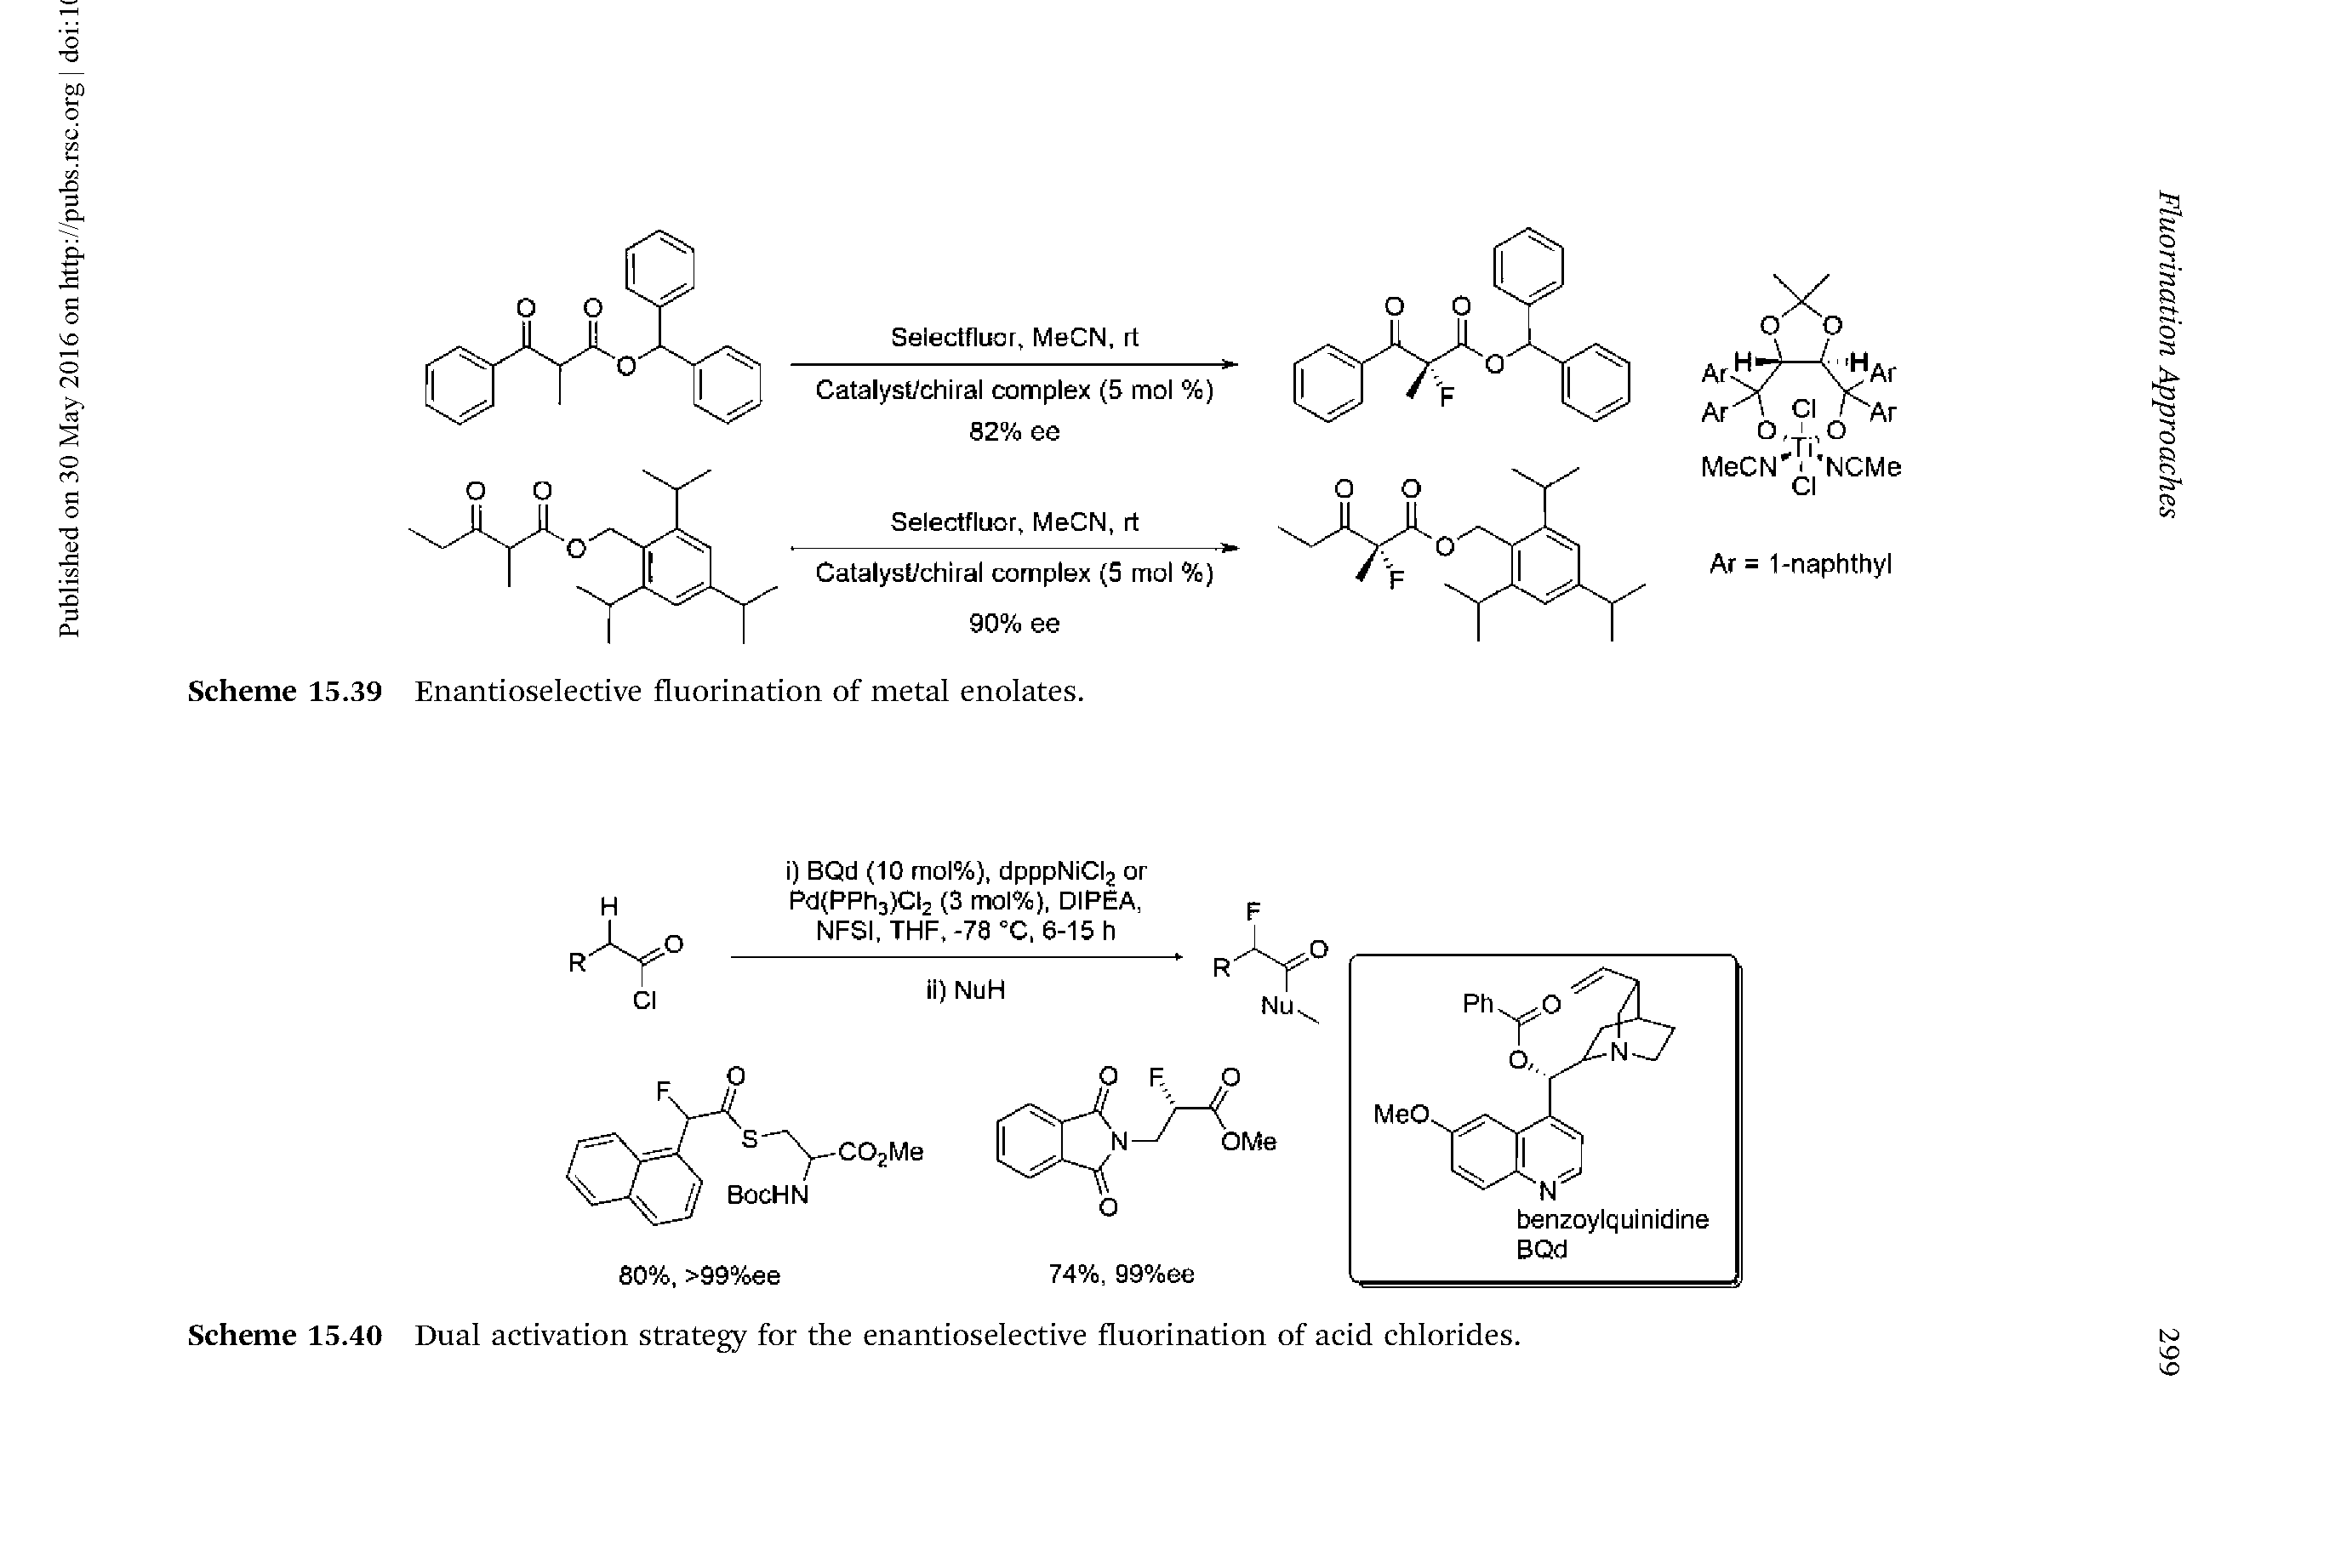 Scheme 15.40 Dual activation strategy for the enantioselective fluorination of acid chlorides.